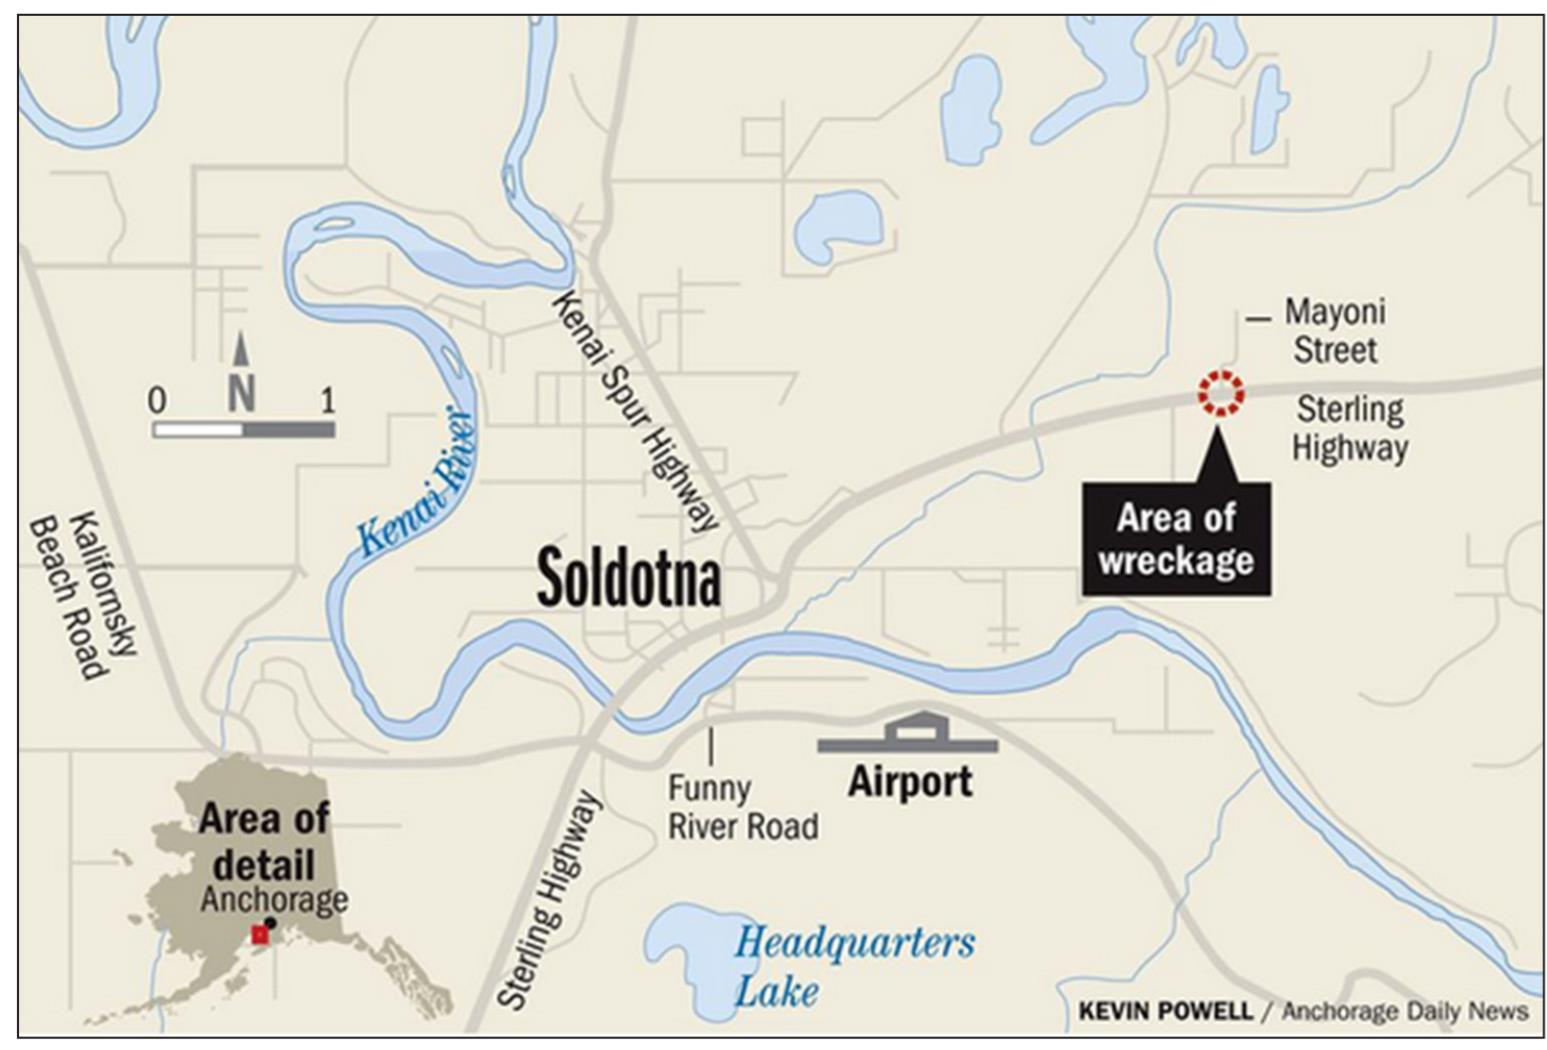 HERE IS A MAP that shows the area of wreckage after two small planes collided near Soldotna Airport Friday last week, killing all seven people.